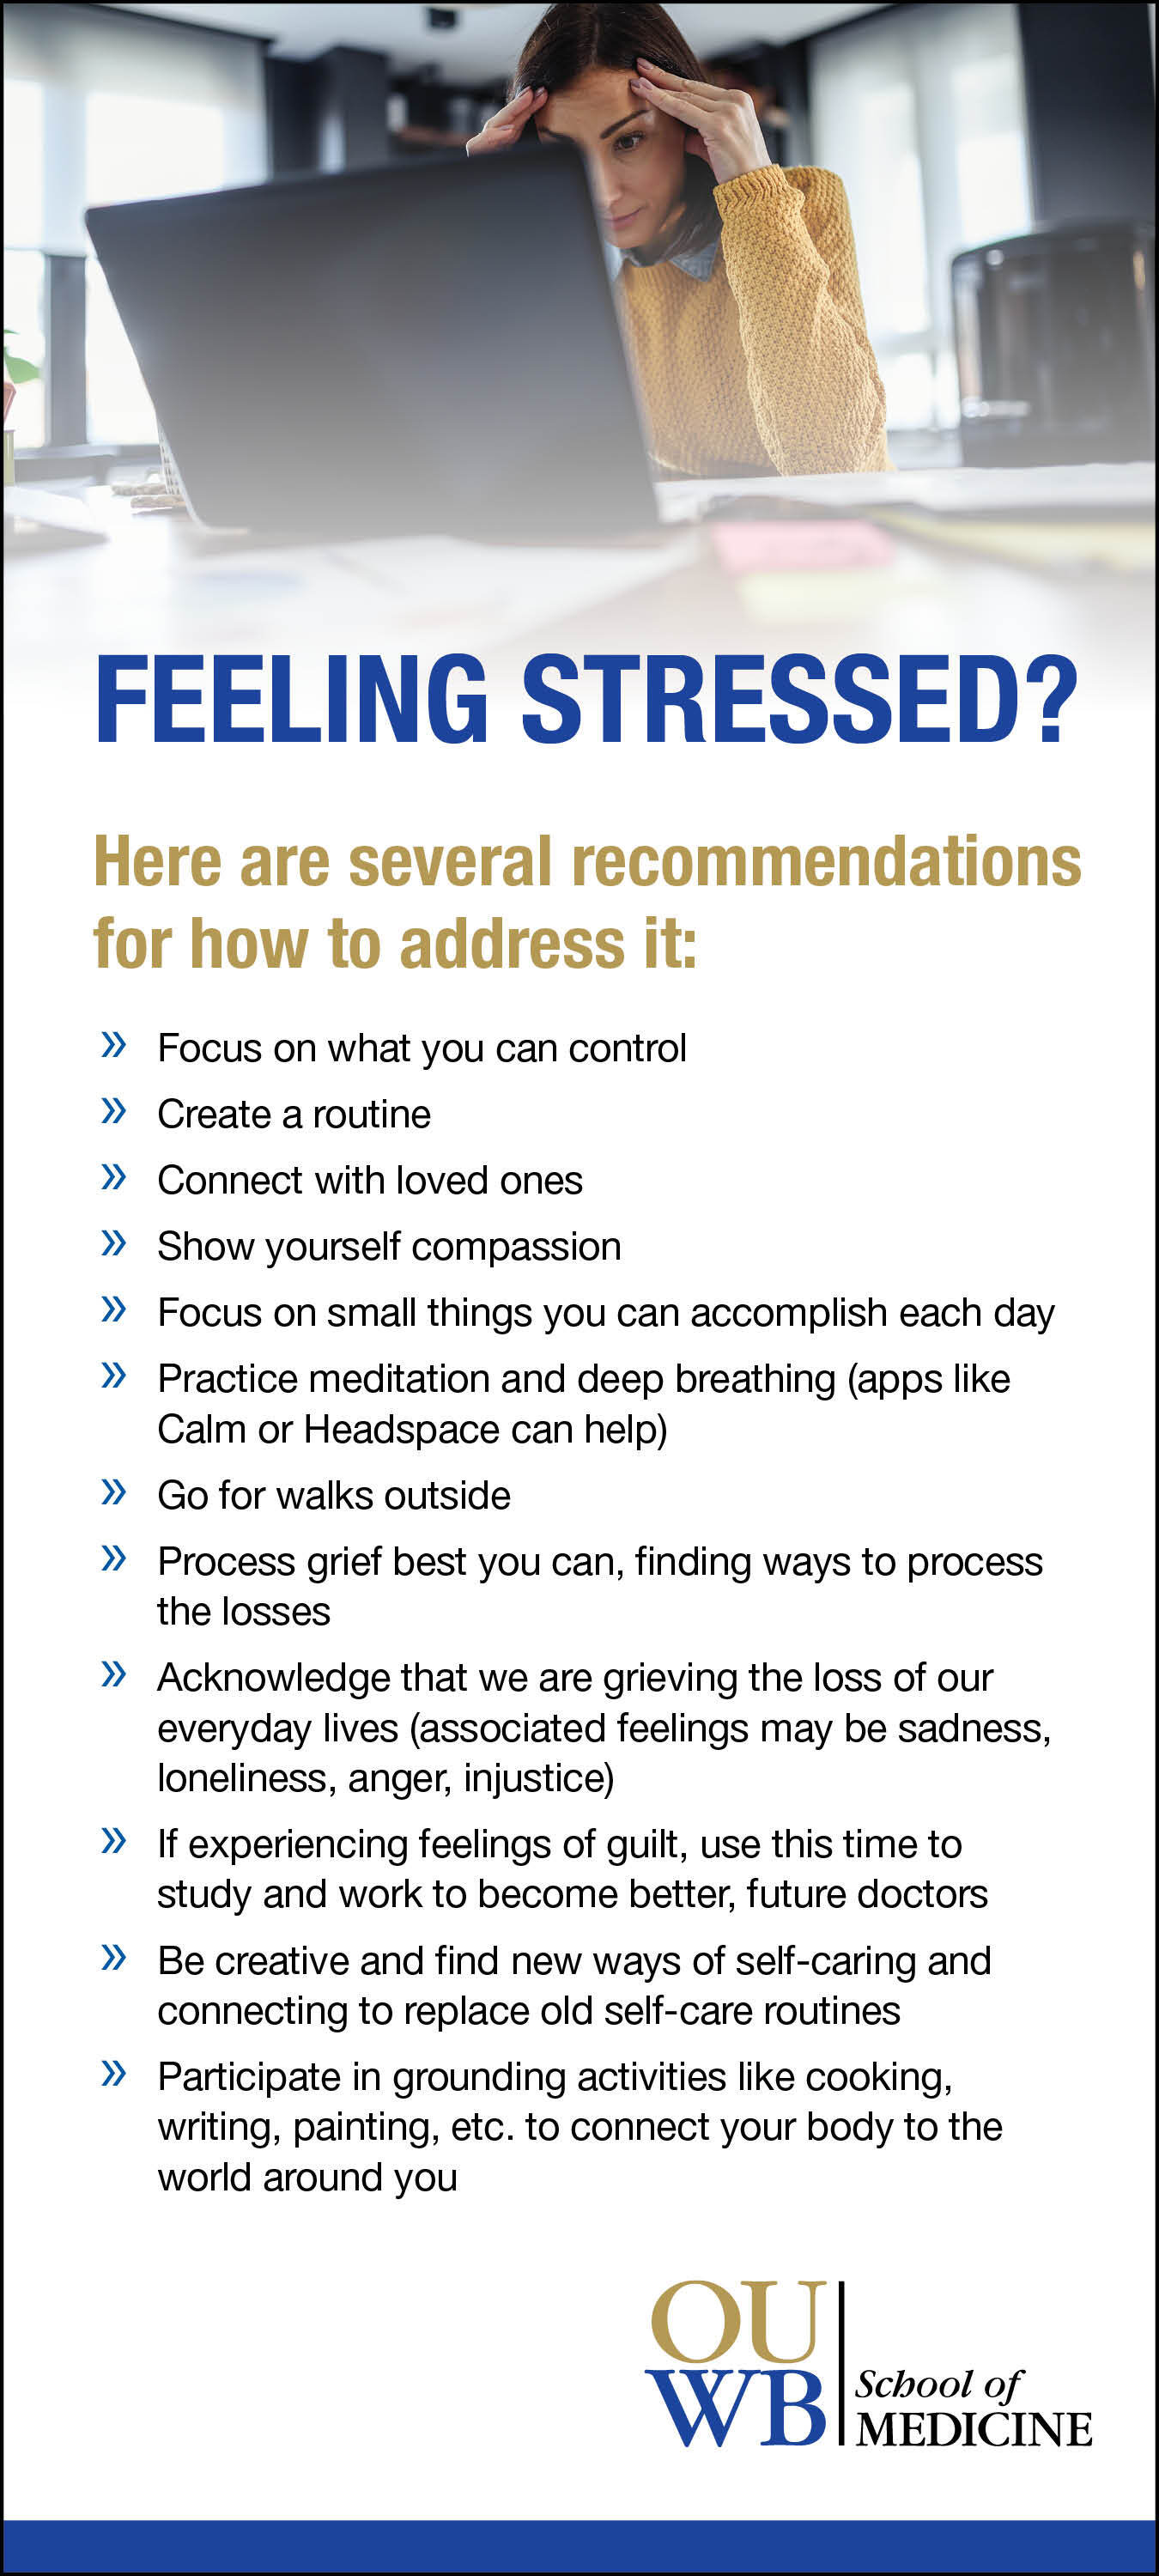 A graphic with various tips on dealing with stress caused by COVID-19.